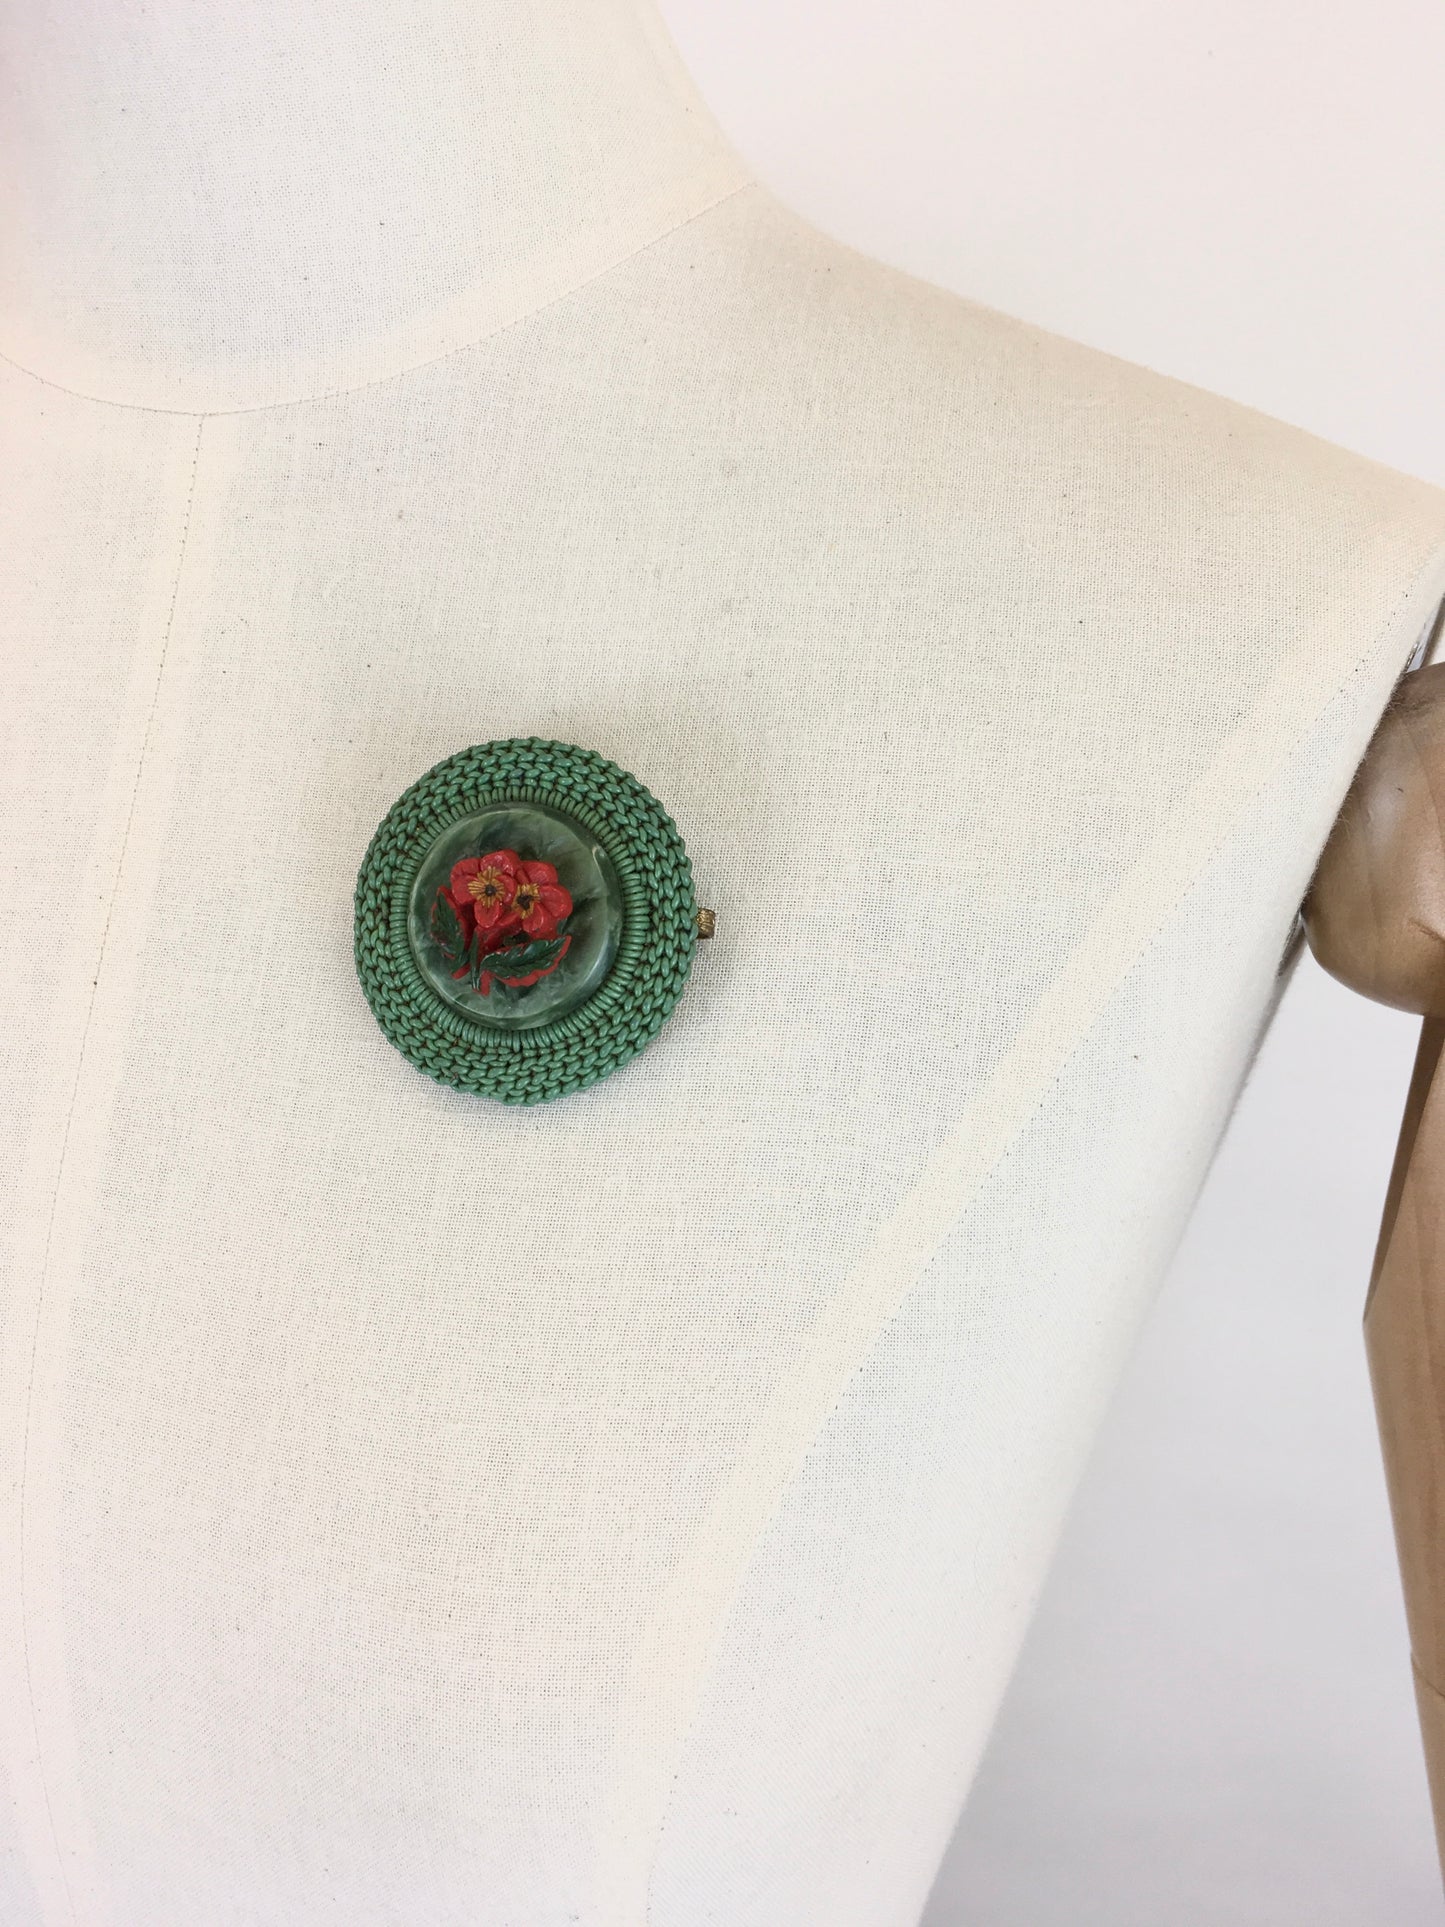 Original 1940’s Make Do and Mend Telephone Wire Brooch - In A Festive Red and Green Colour Pallet